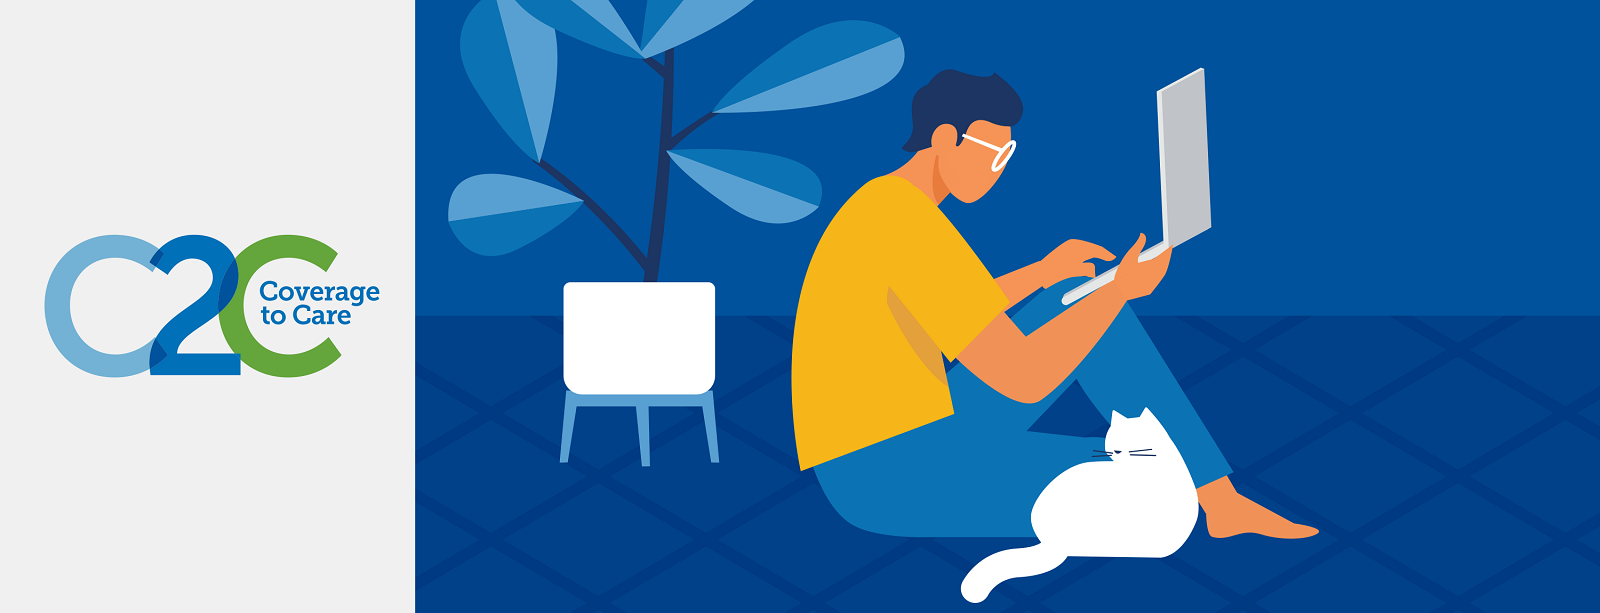 coverage to care banner, graphic of a person sitting on their floor, holding their laptop up while working on it with a white cat resting at the person's feet